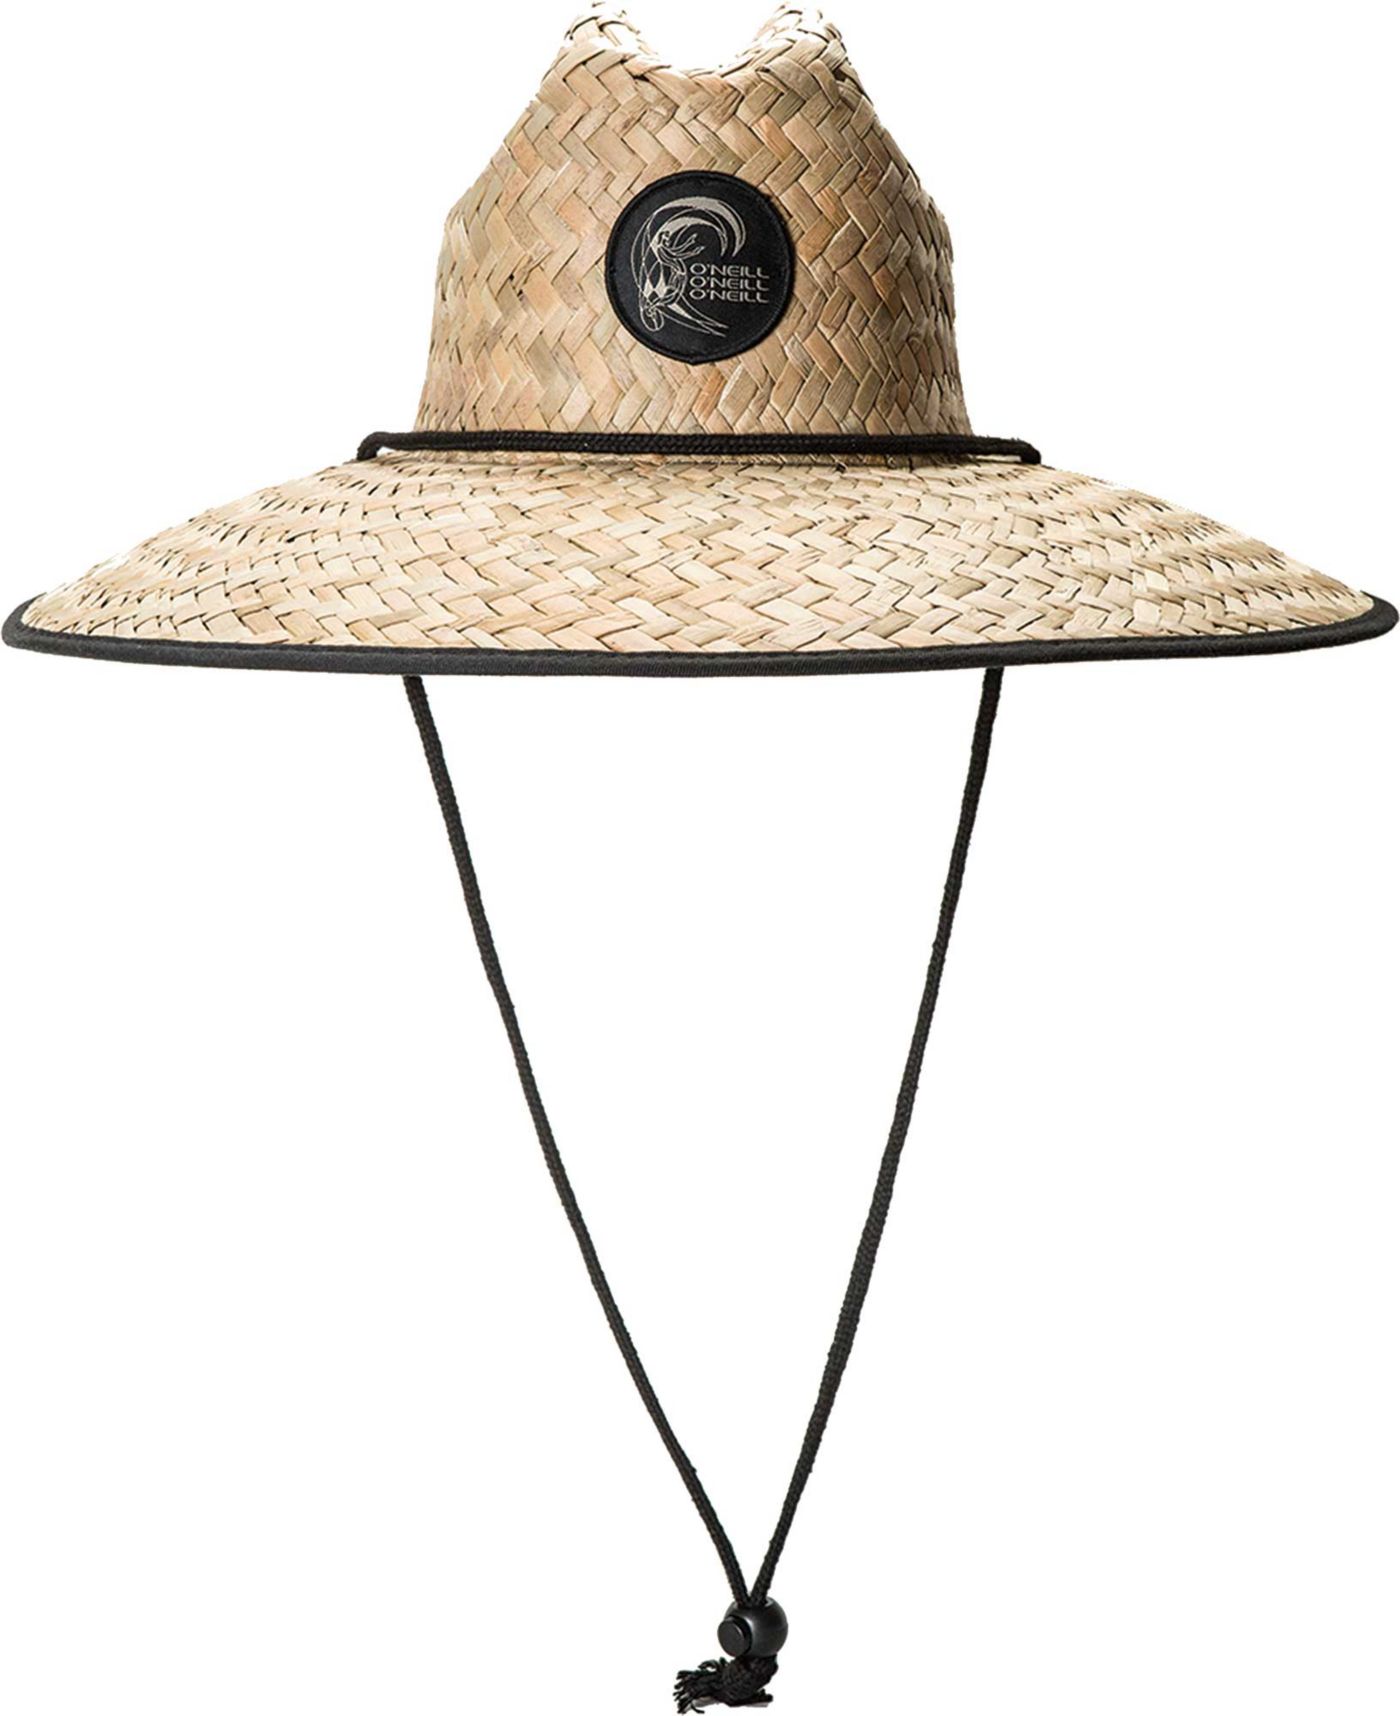 O'Neill Men's Sonoma Lifeguard Hat | DICK'S Sporting Goods